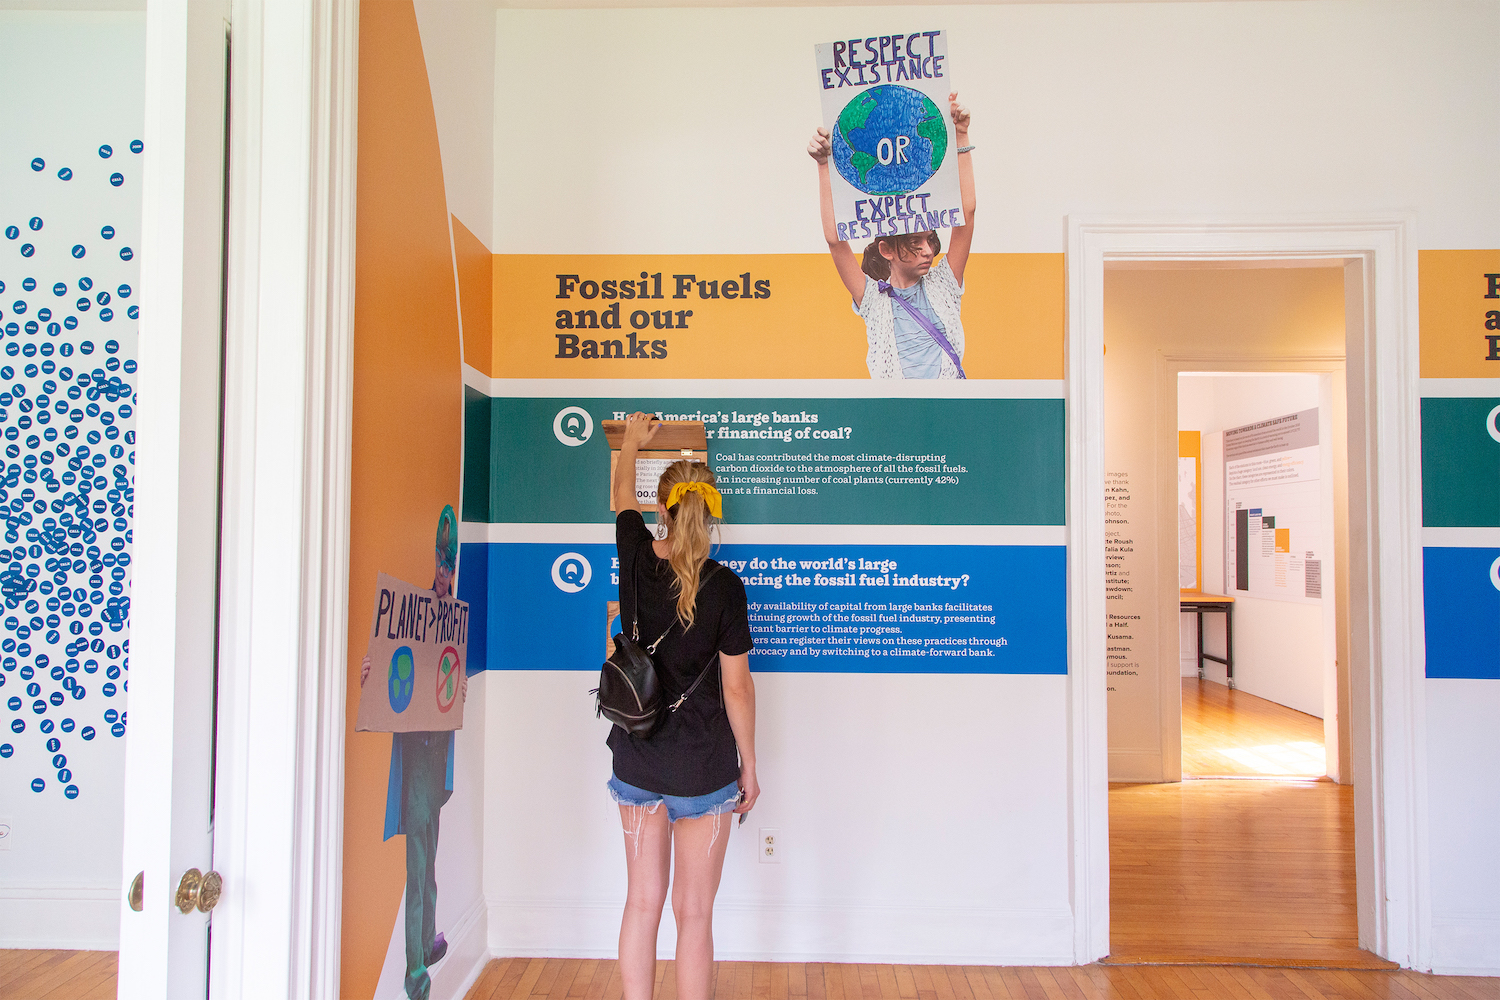 Taking Action Exhibition at The Climate Museum. Photo by Lisa Goulet